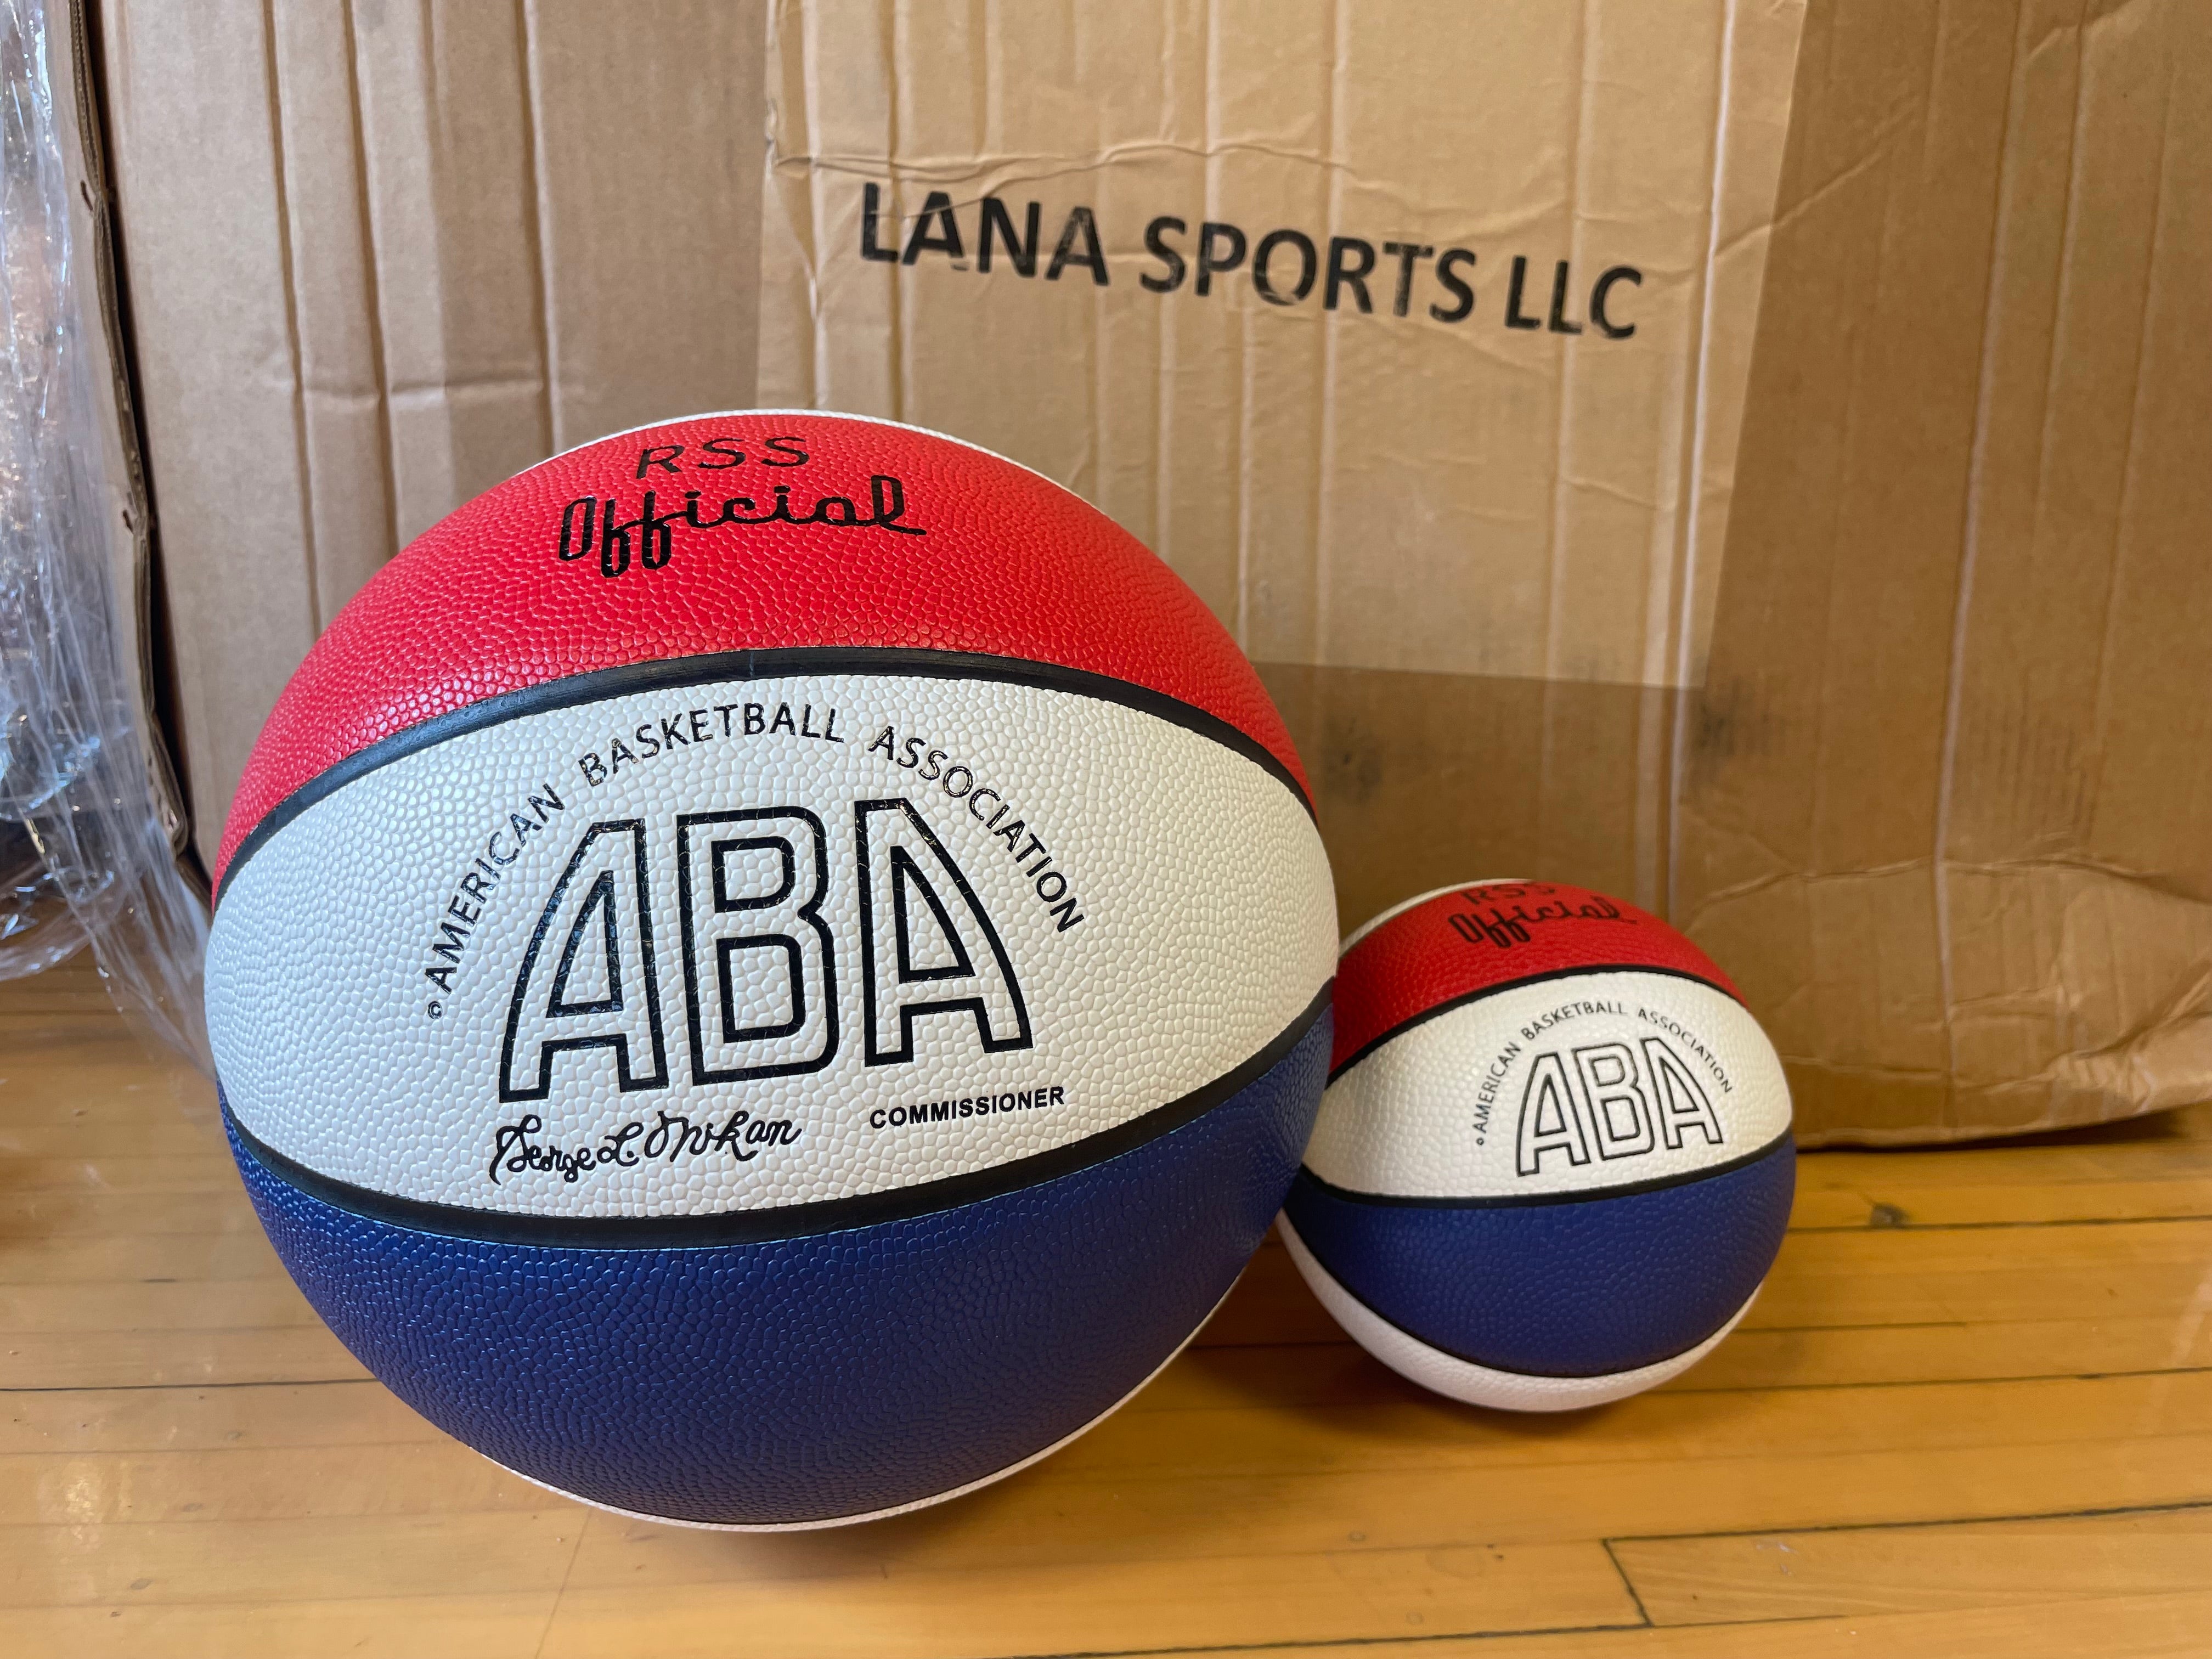 Introducing ABA Mini Basketball: A New Era in Collector's Delight